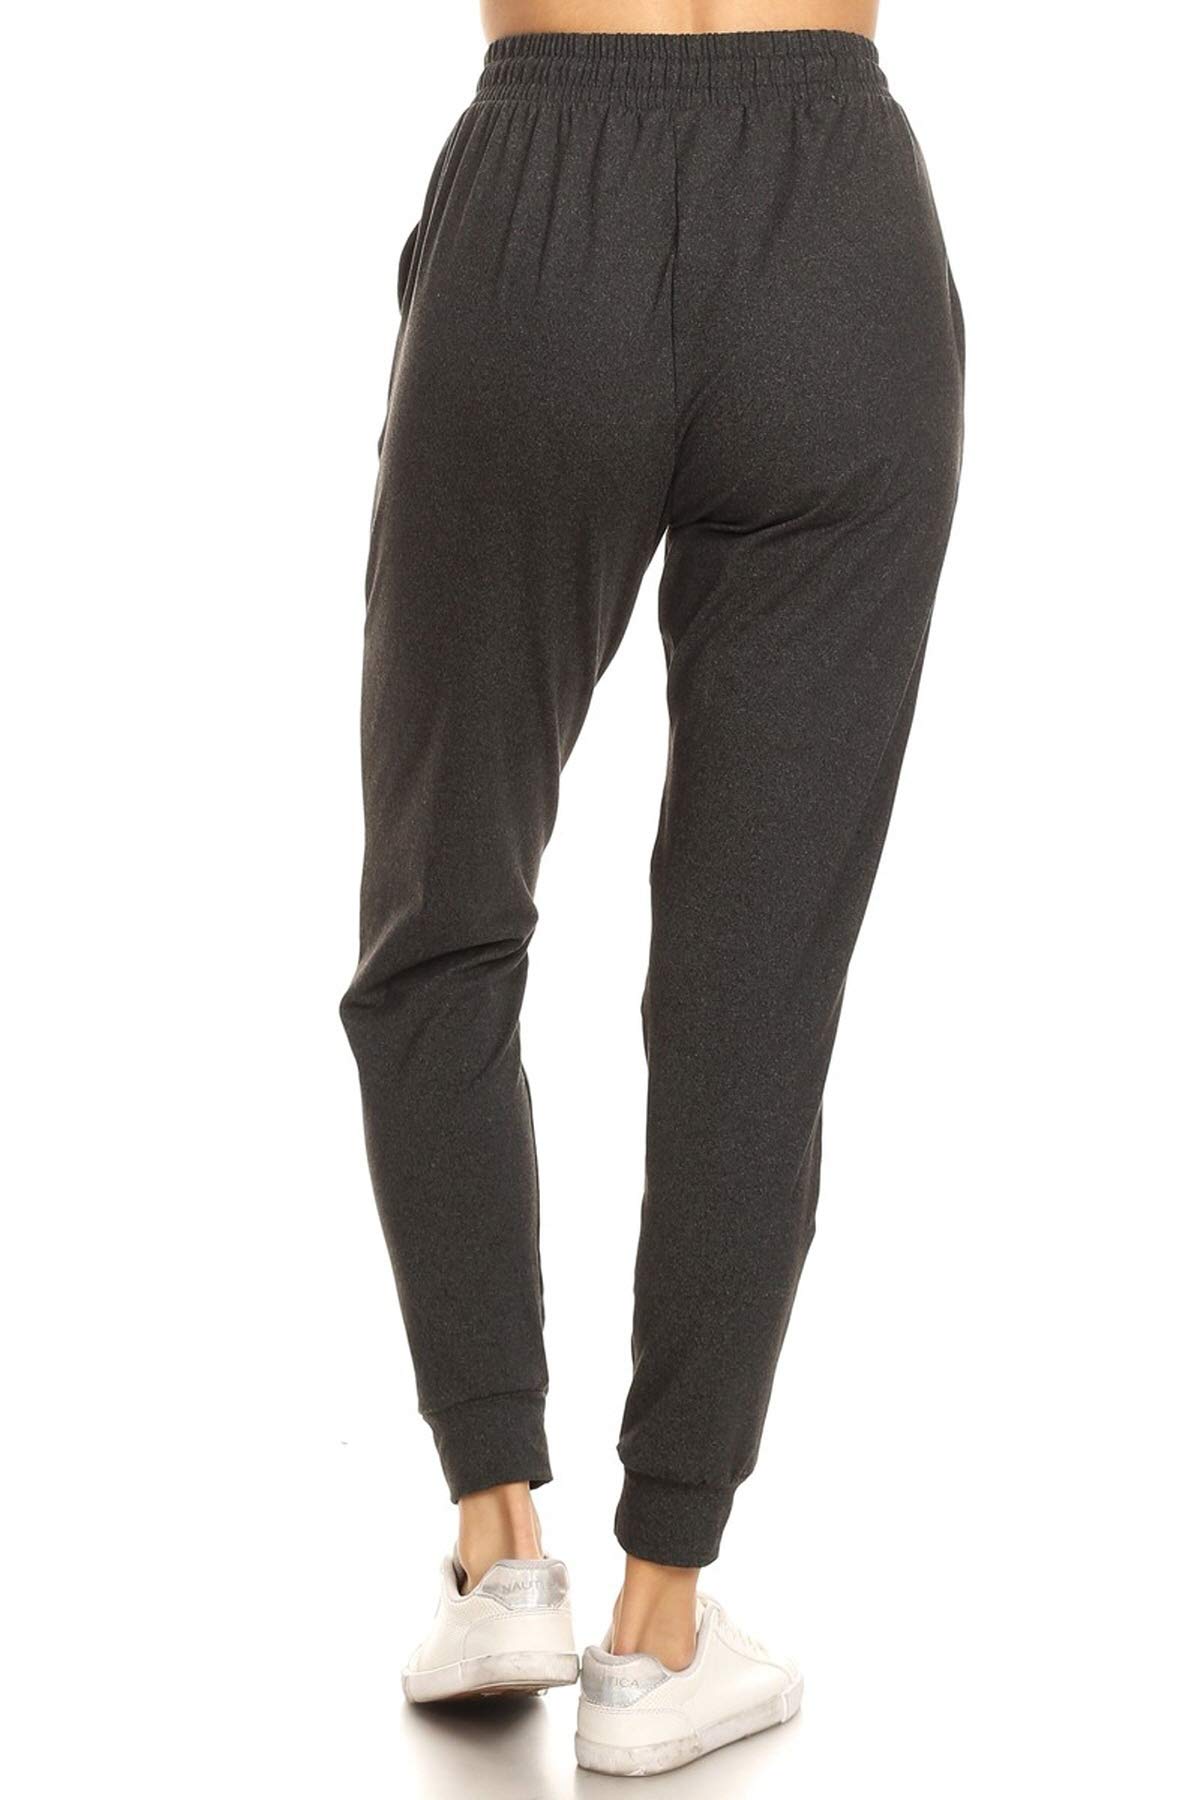 Leggings Depot Women's Relaxed-fit Jogger Track Cuff Sweatpants with Pockets for Yoga, Workout